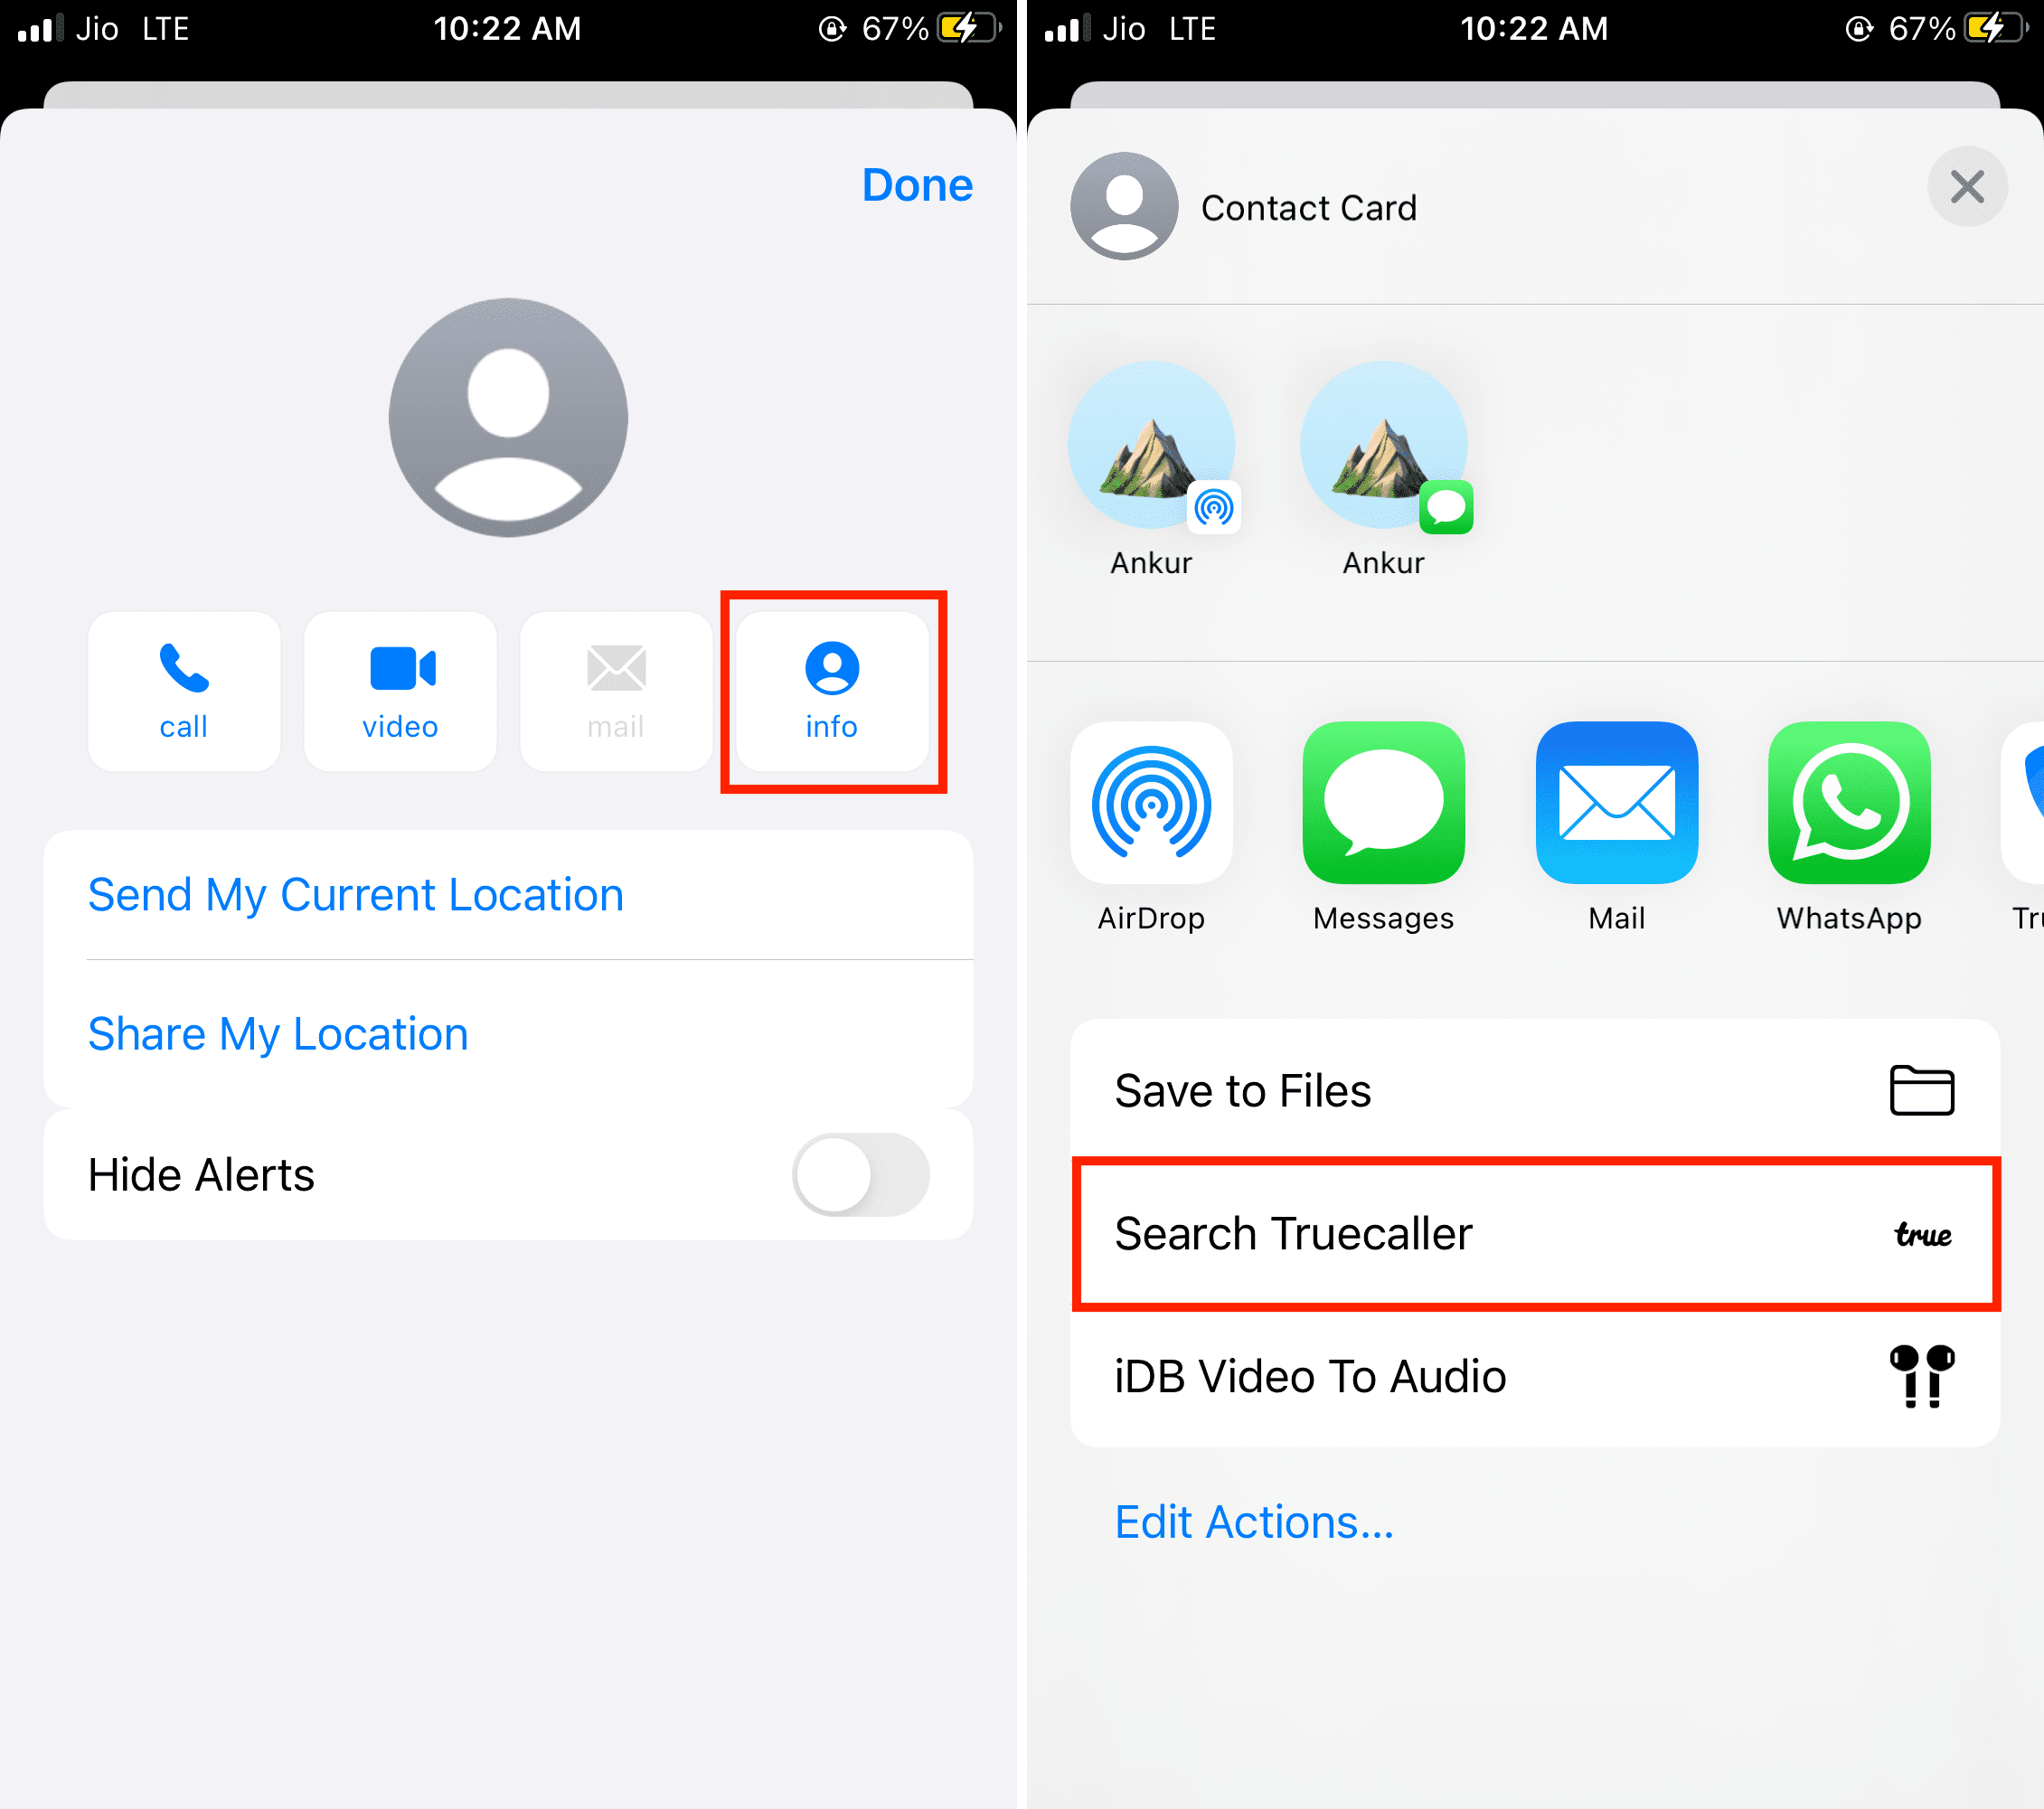 Know who messaged you using Truecaller on iPhone